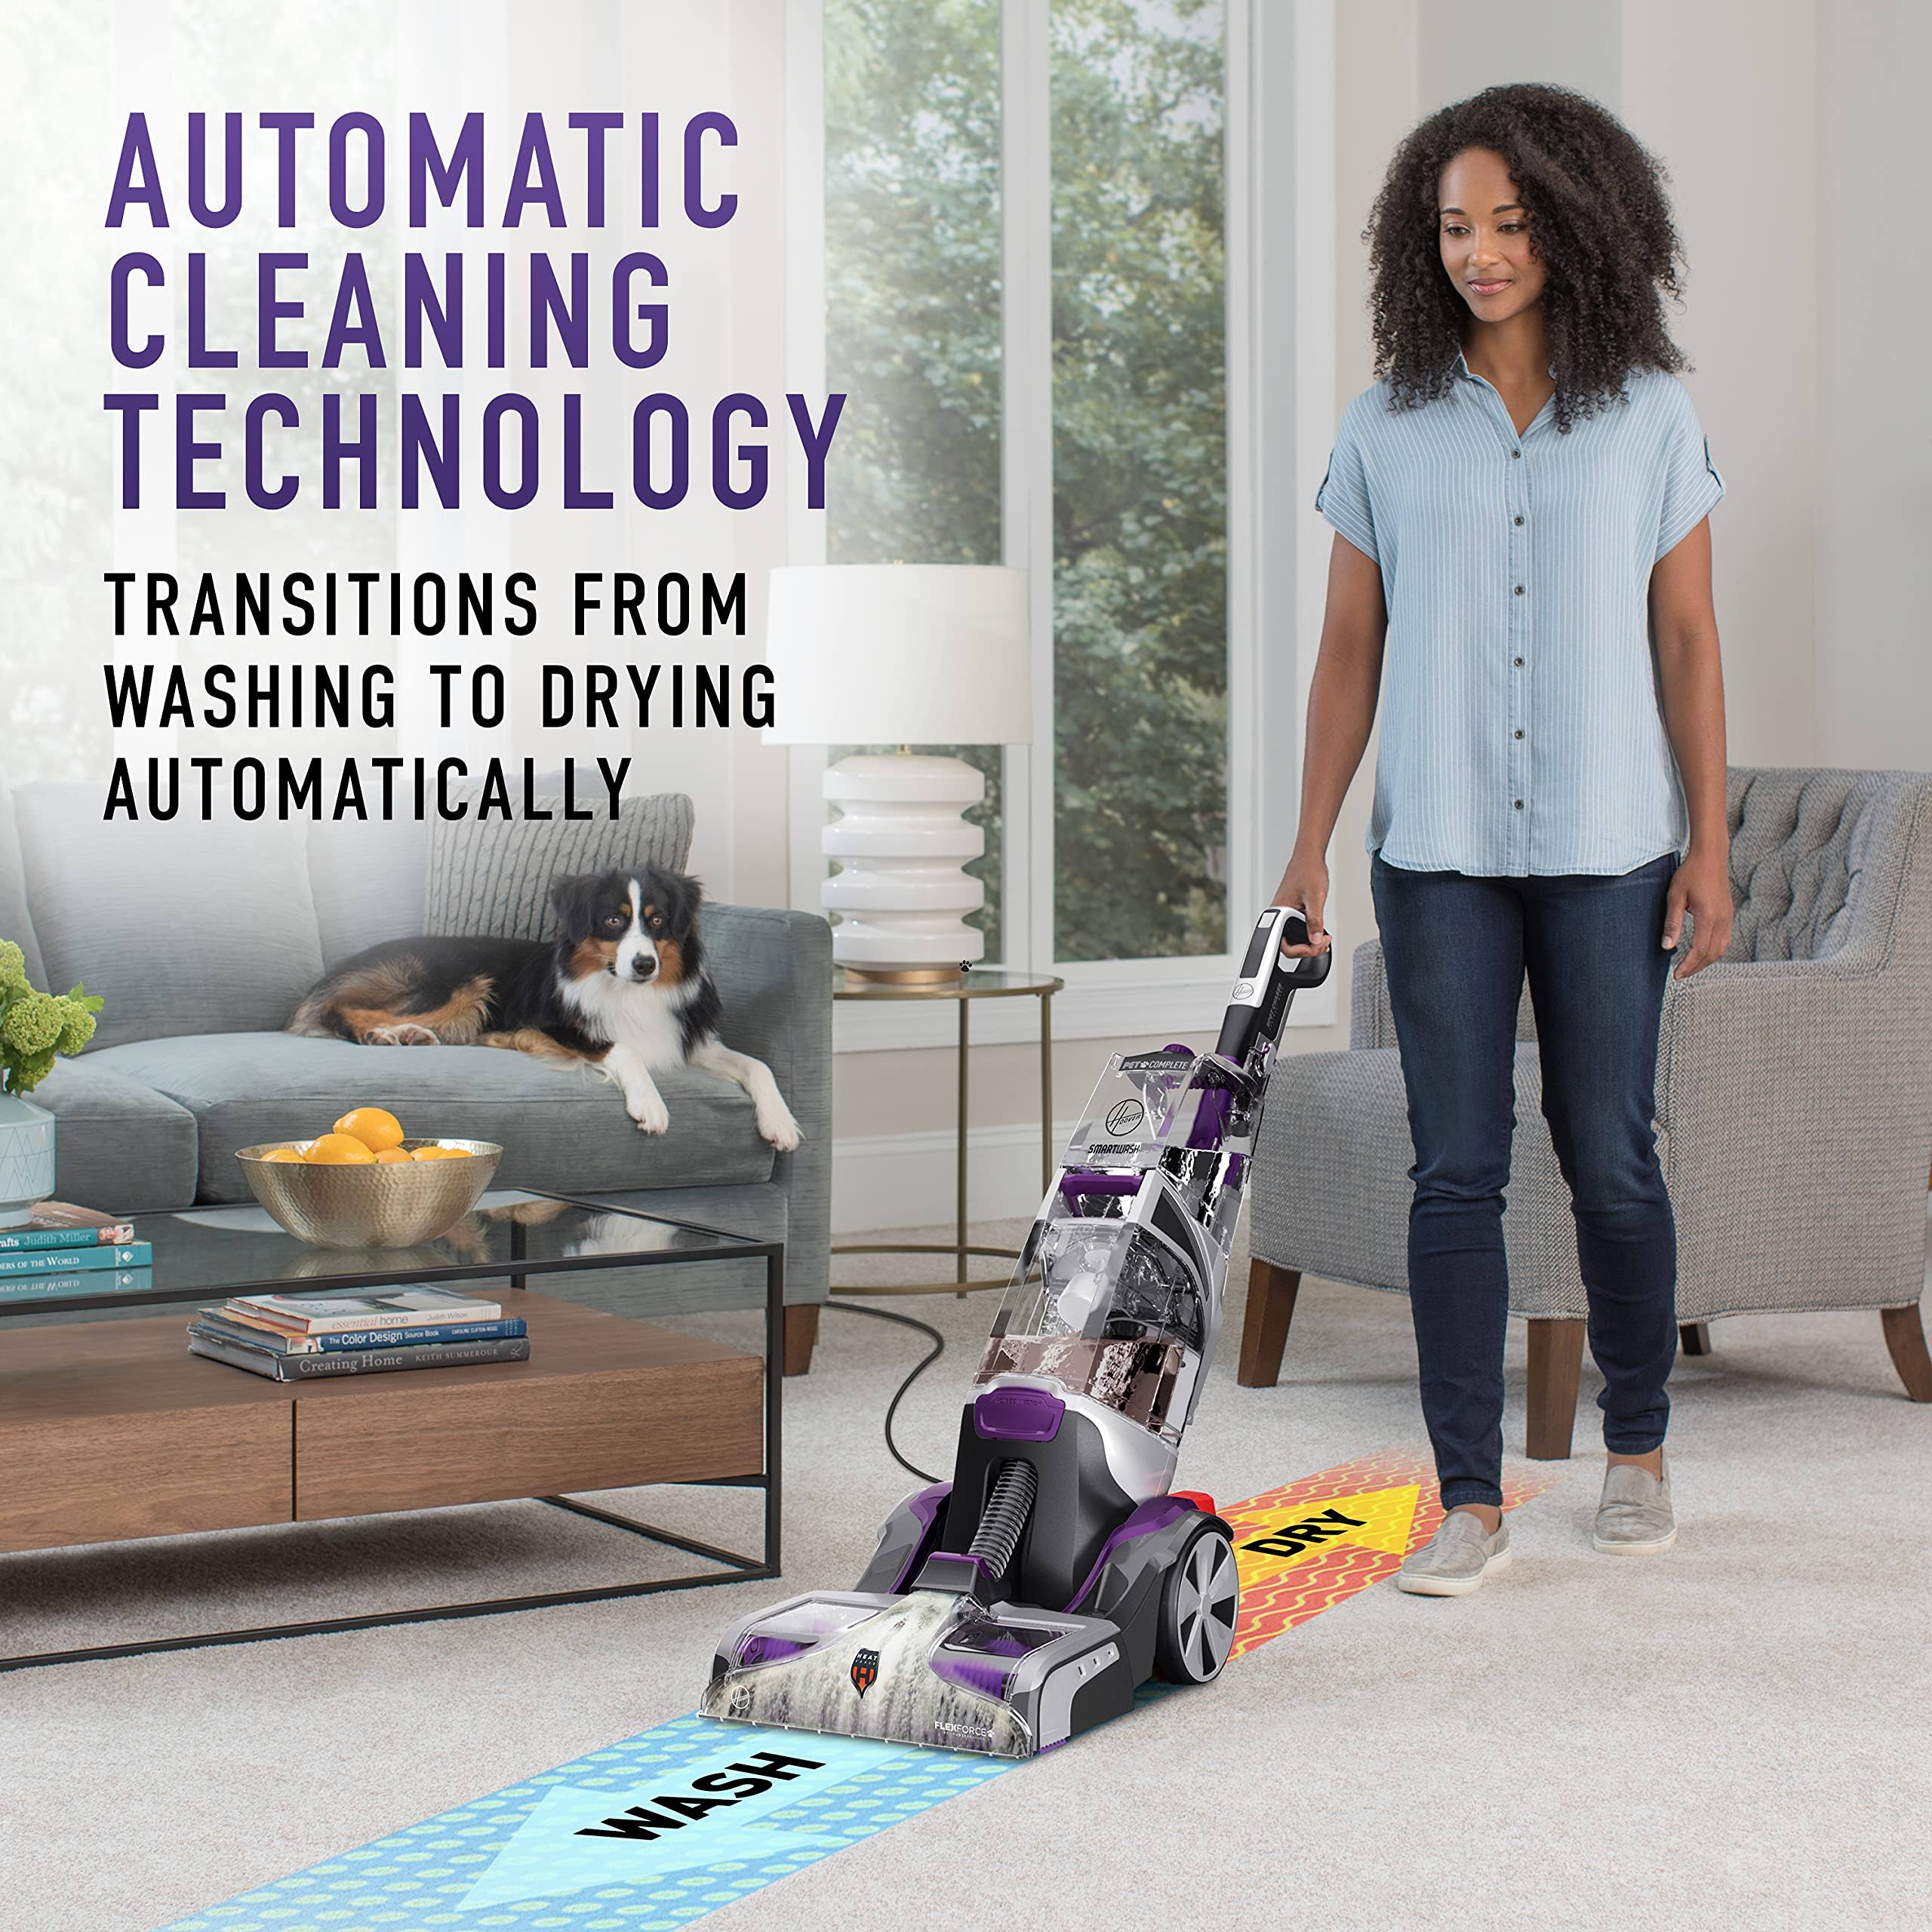 Hoover SmartWash Automatic Carpet Cleaner with Spot Chaser Stain Remover Wand, Shampooer Machine for Pets, FH53000PC, Purple